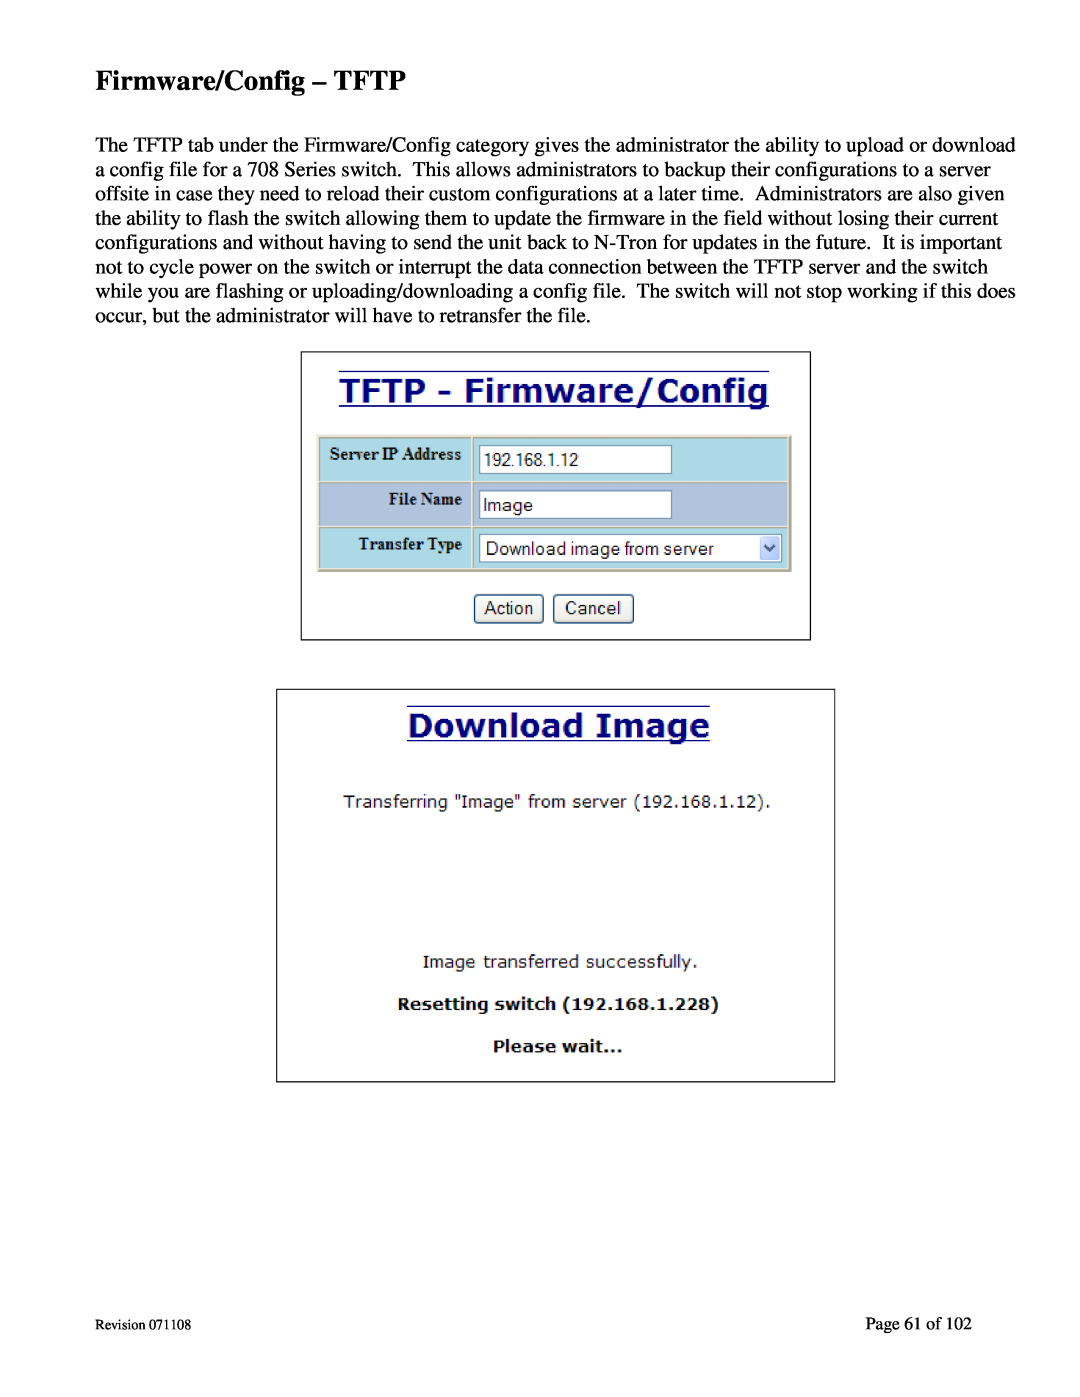 N-Tron 708M12 user manual Firmware/Config - TFTP, Page 61 of 